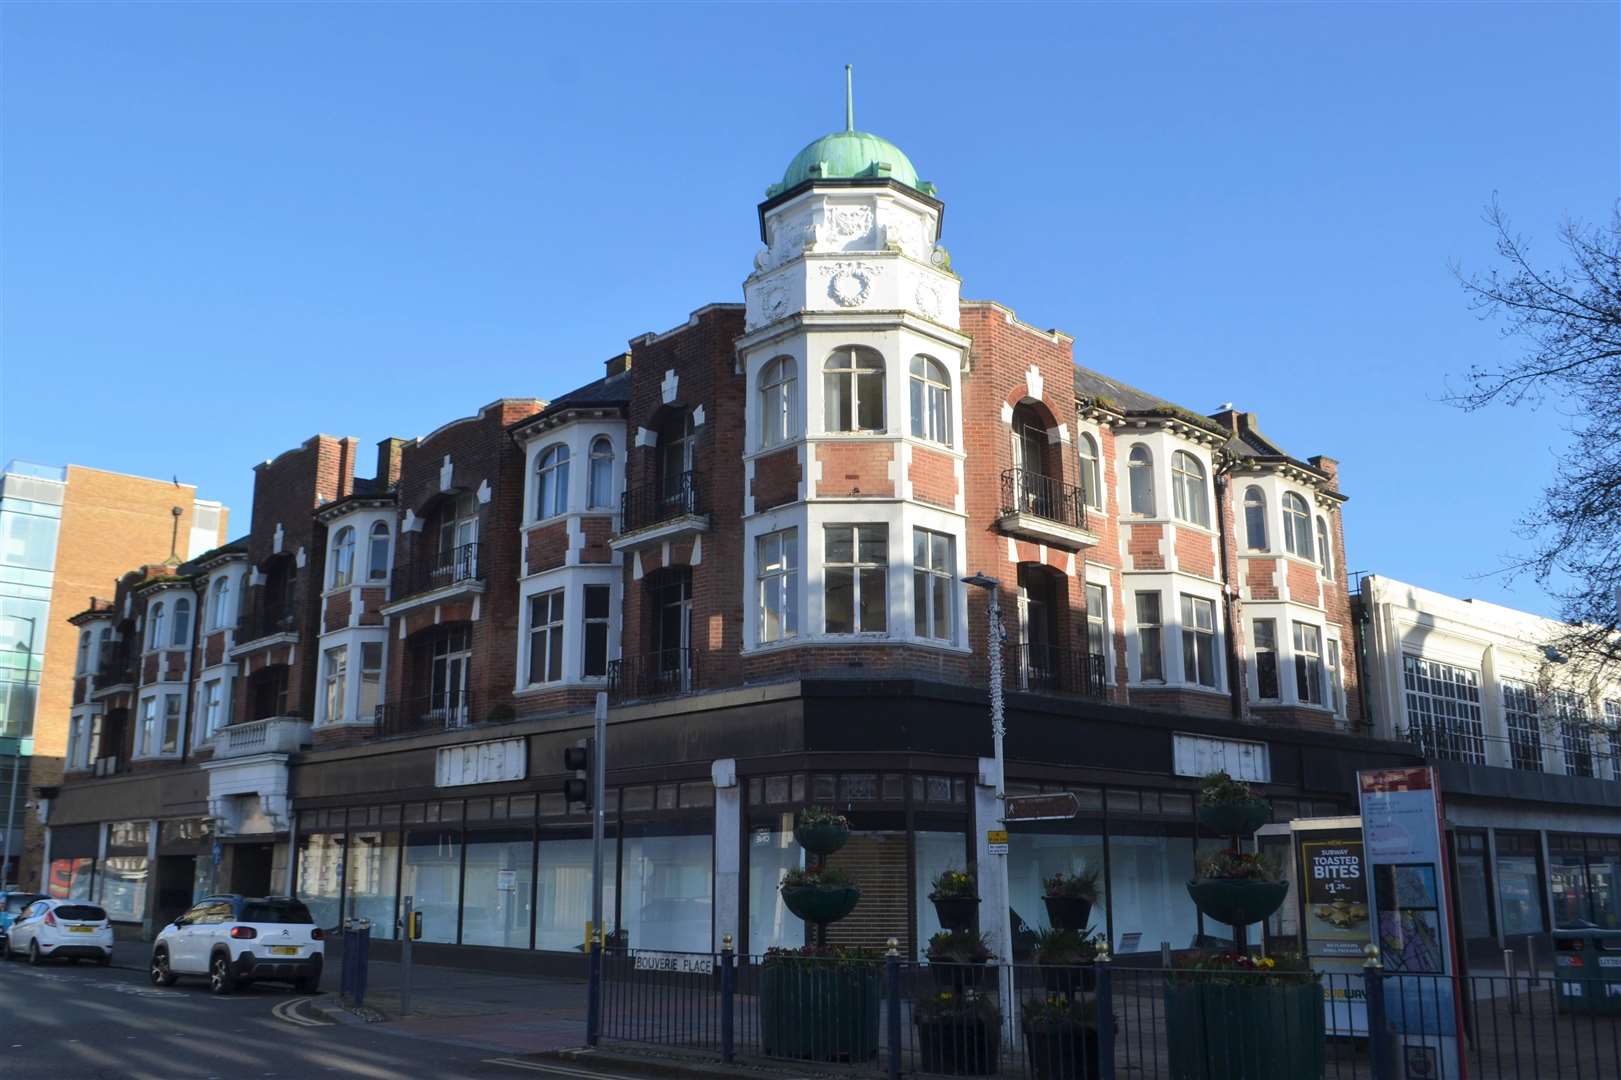 The former Debenhams store in Folkestone could house a new health centre